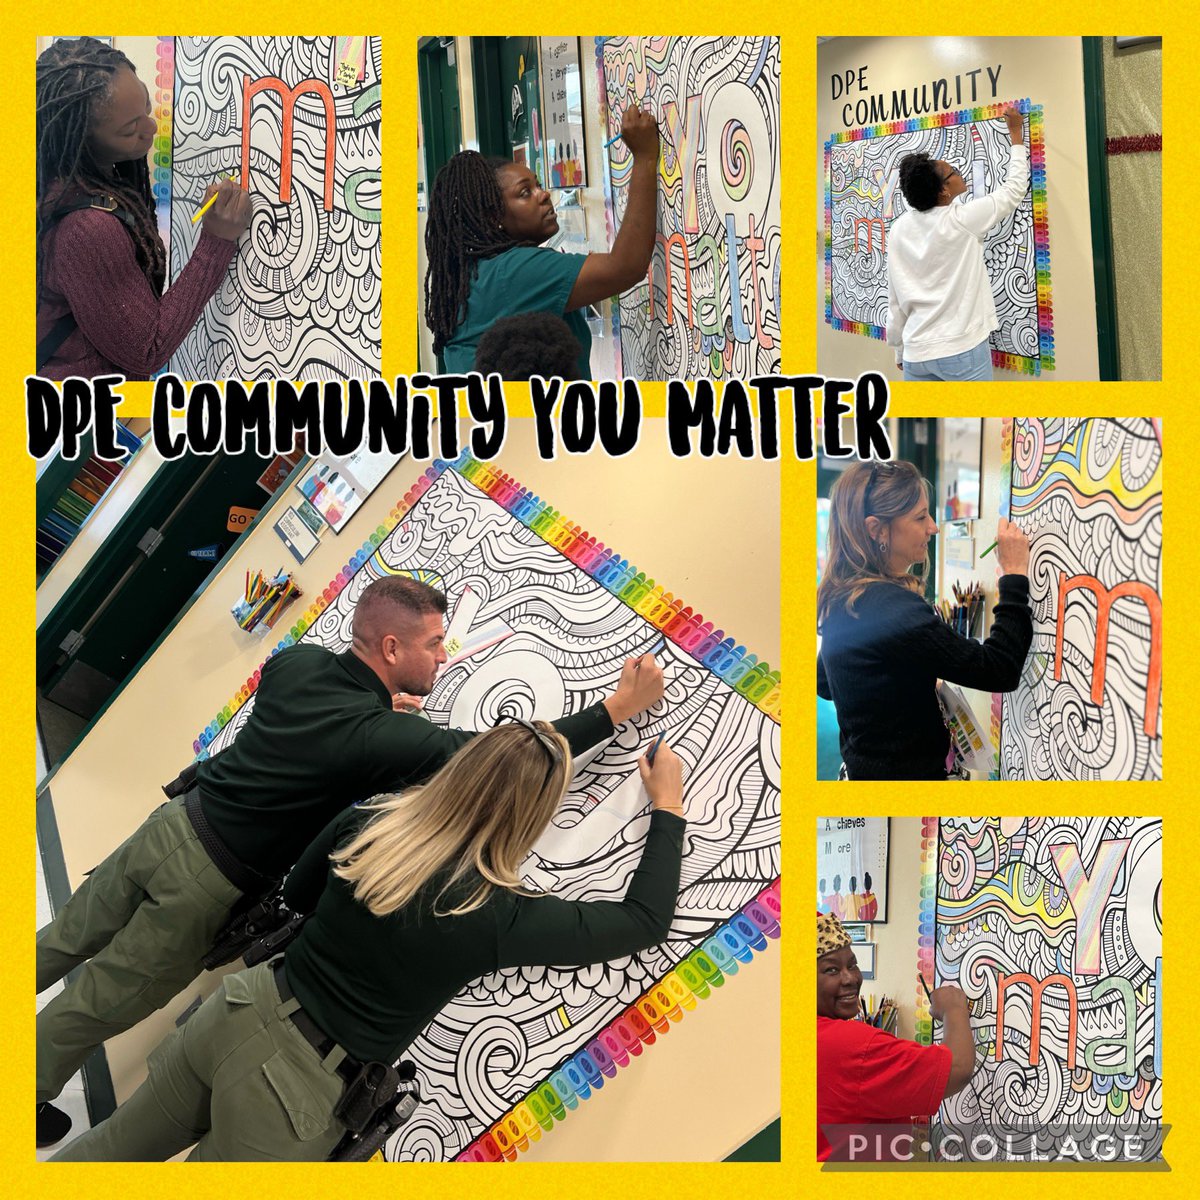 Letting parents and the community know they matter. They add their artistic skills to our large coloring page. Thank you DPE community. @PrincipalDarby1 @MPerezDir